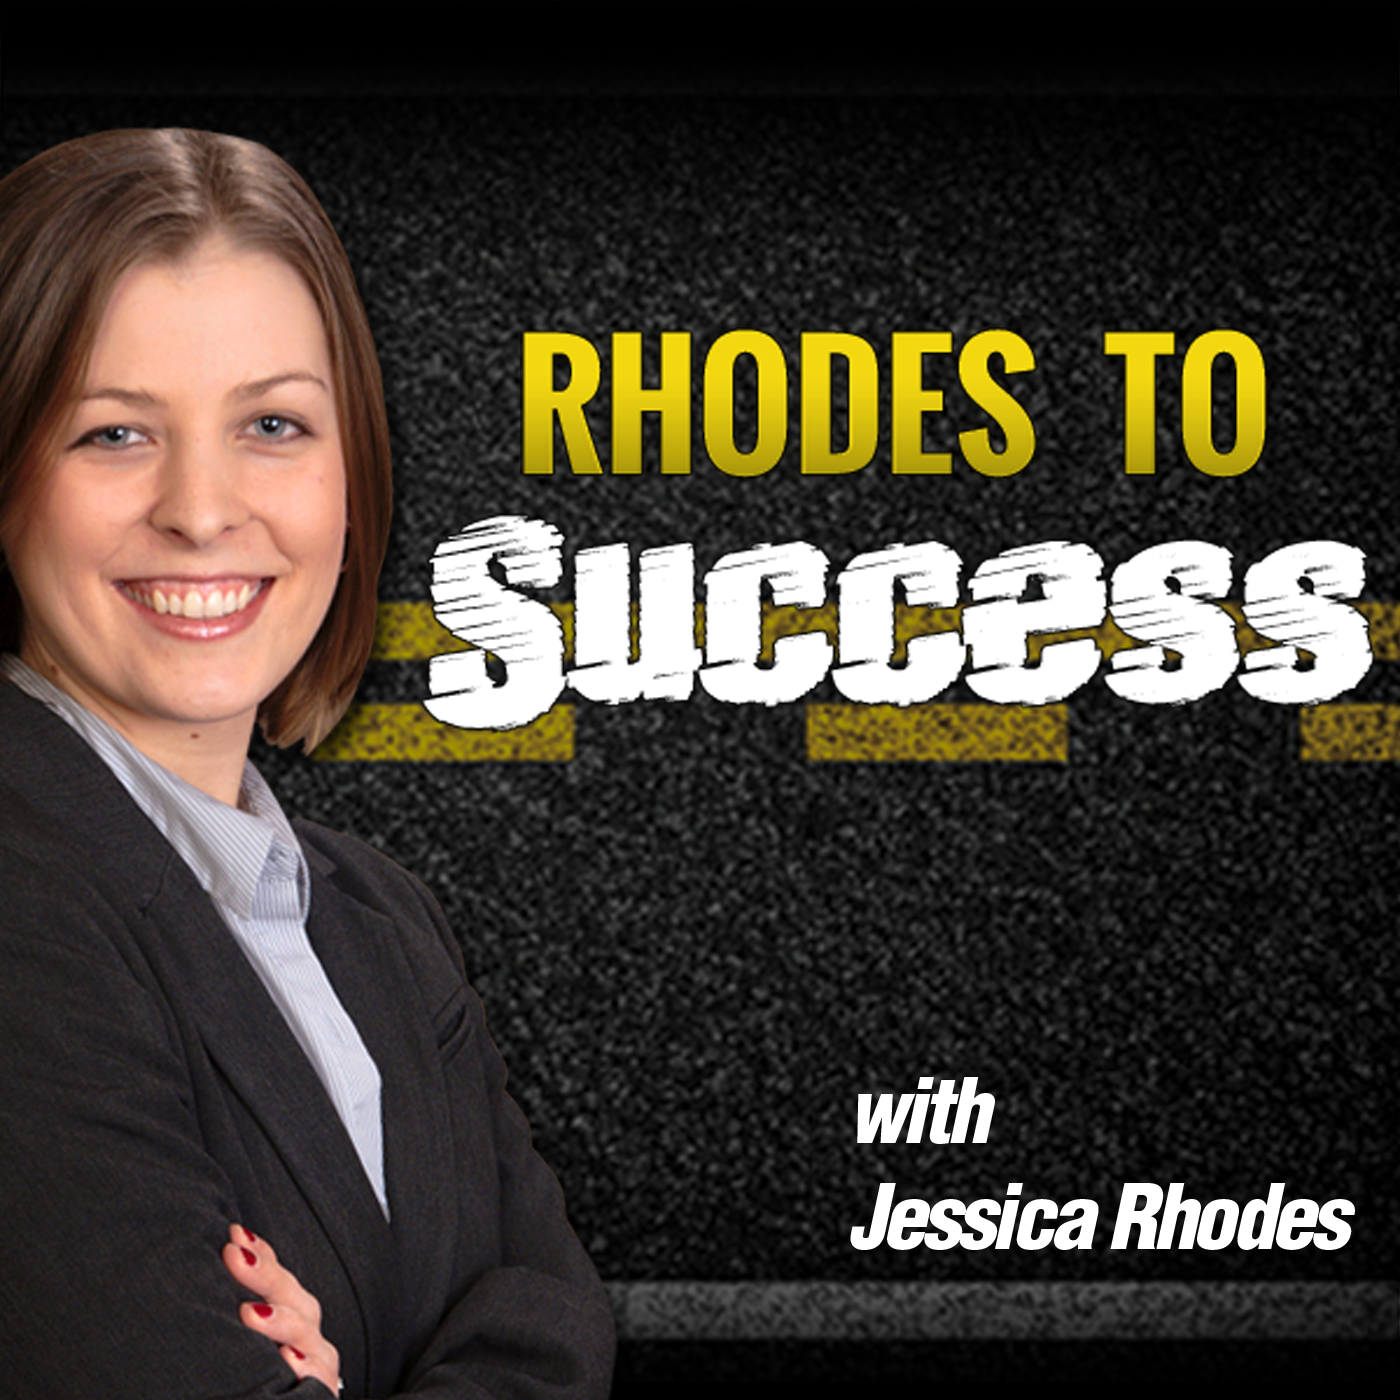 Jessica_Rhodes_To_Success_Podcast.png